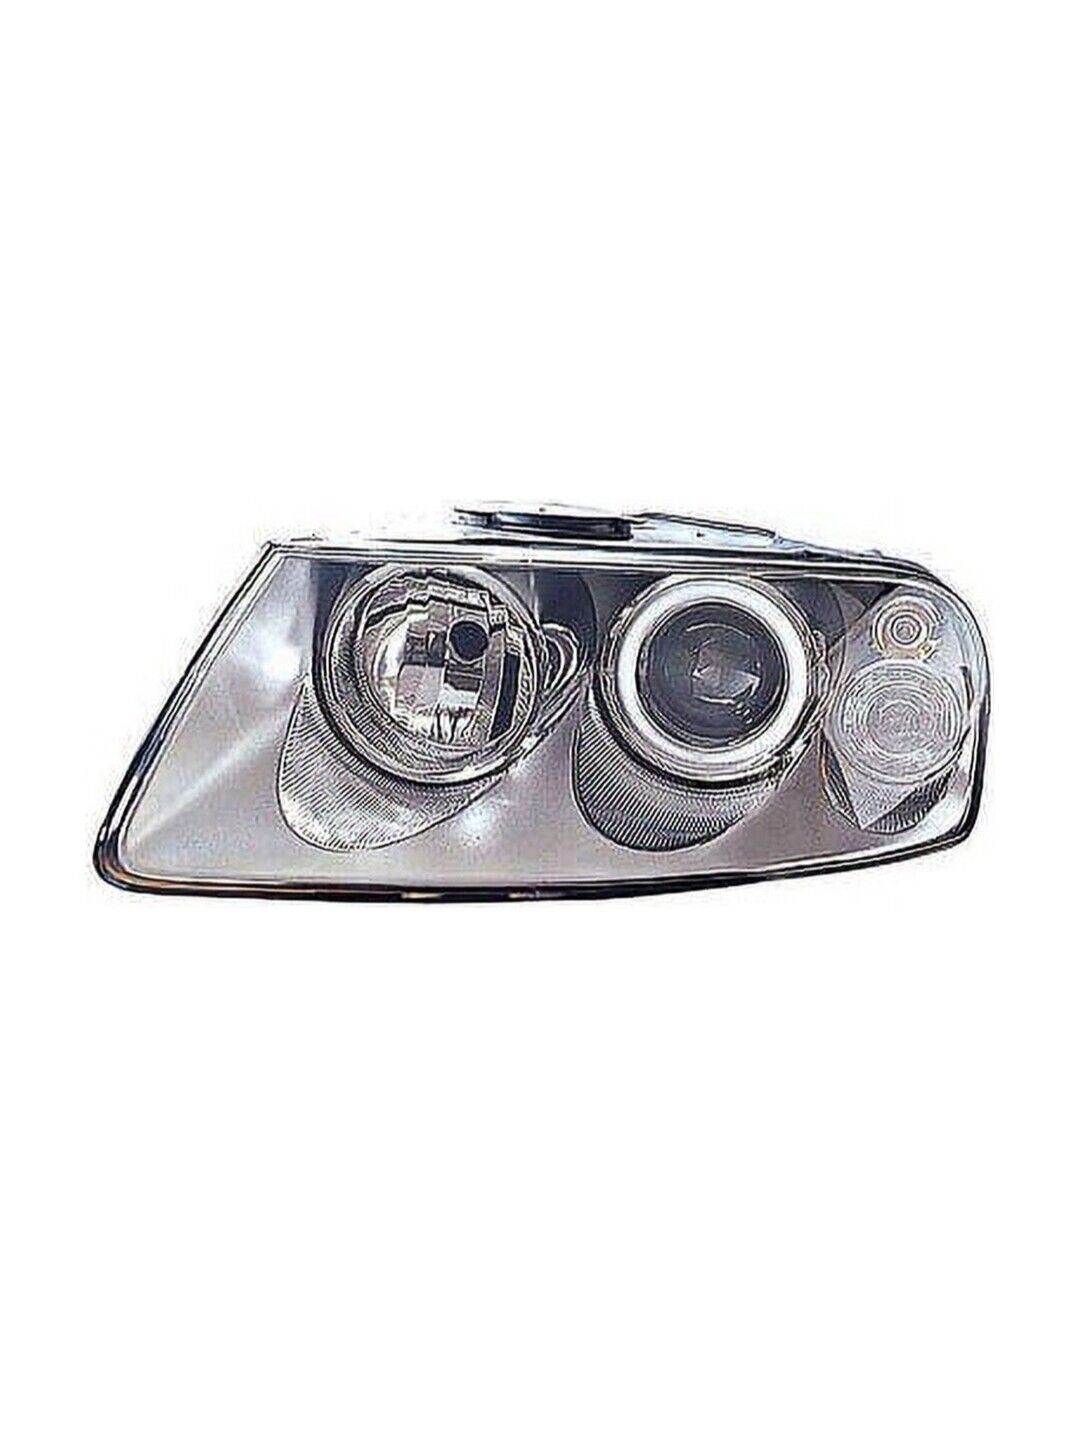 2004-2007 Vw Touareg Replacement Driver Side Head Light Assembly 341-1119l-as